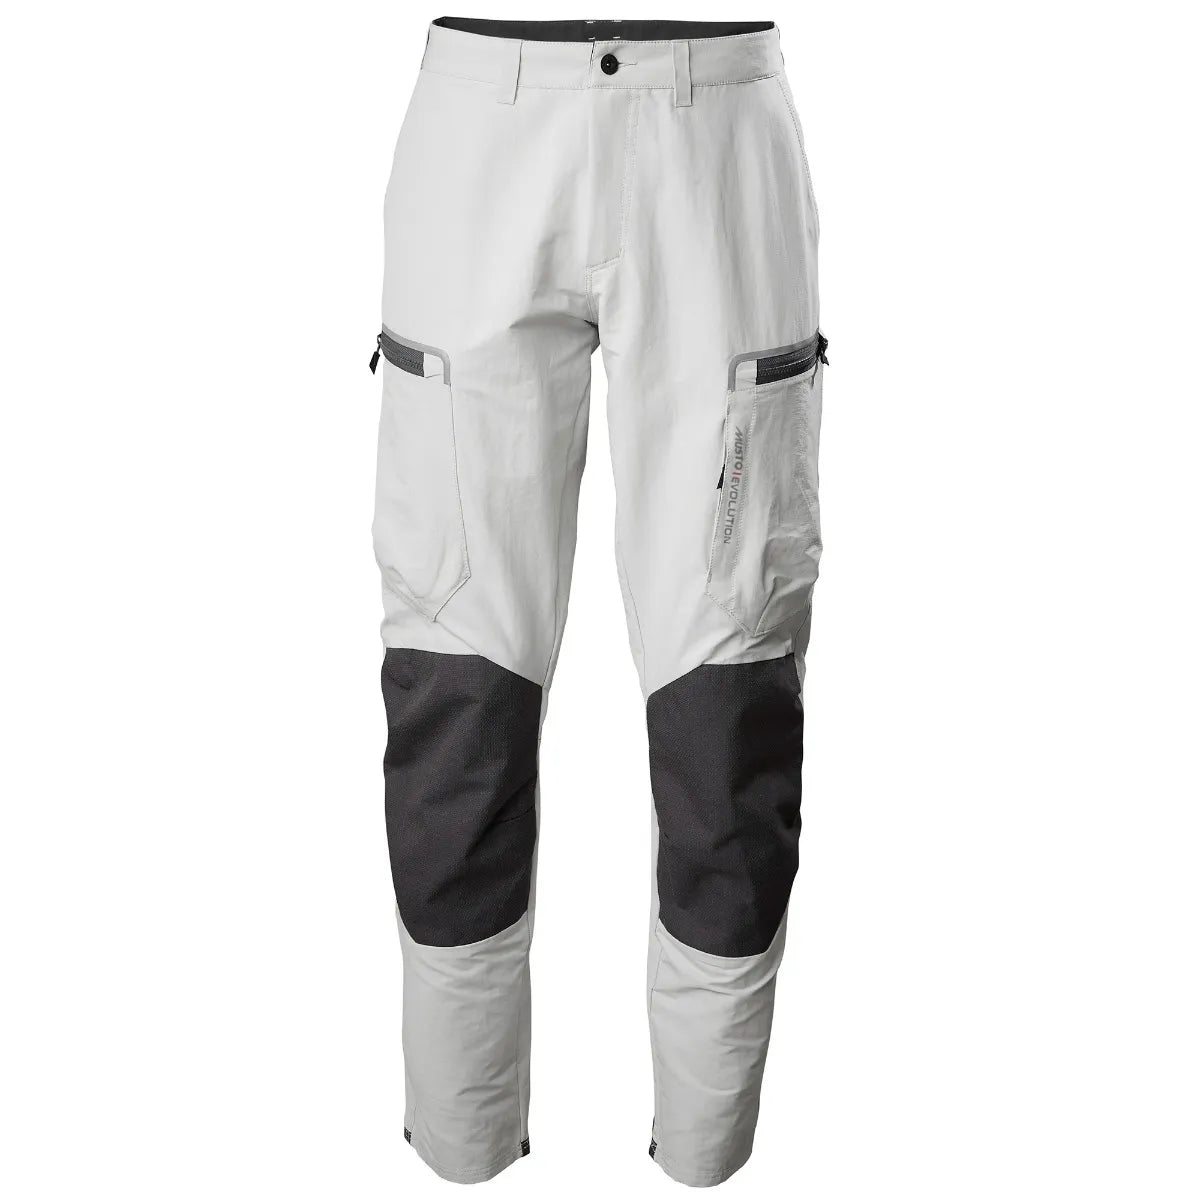 EVOLUTION PERFORMANCE 2.0 TROUSERS